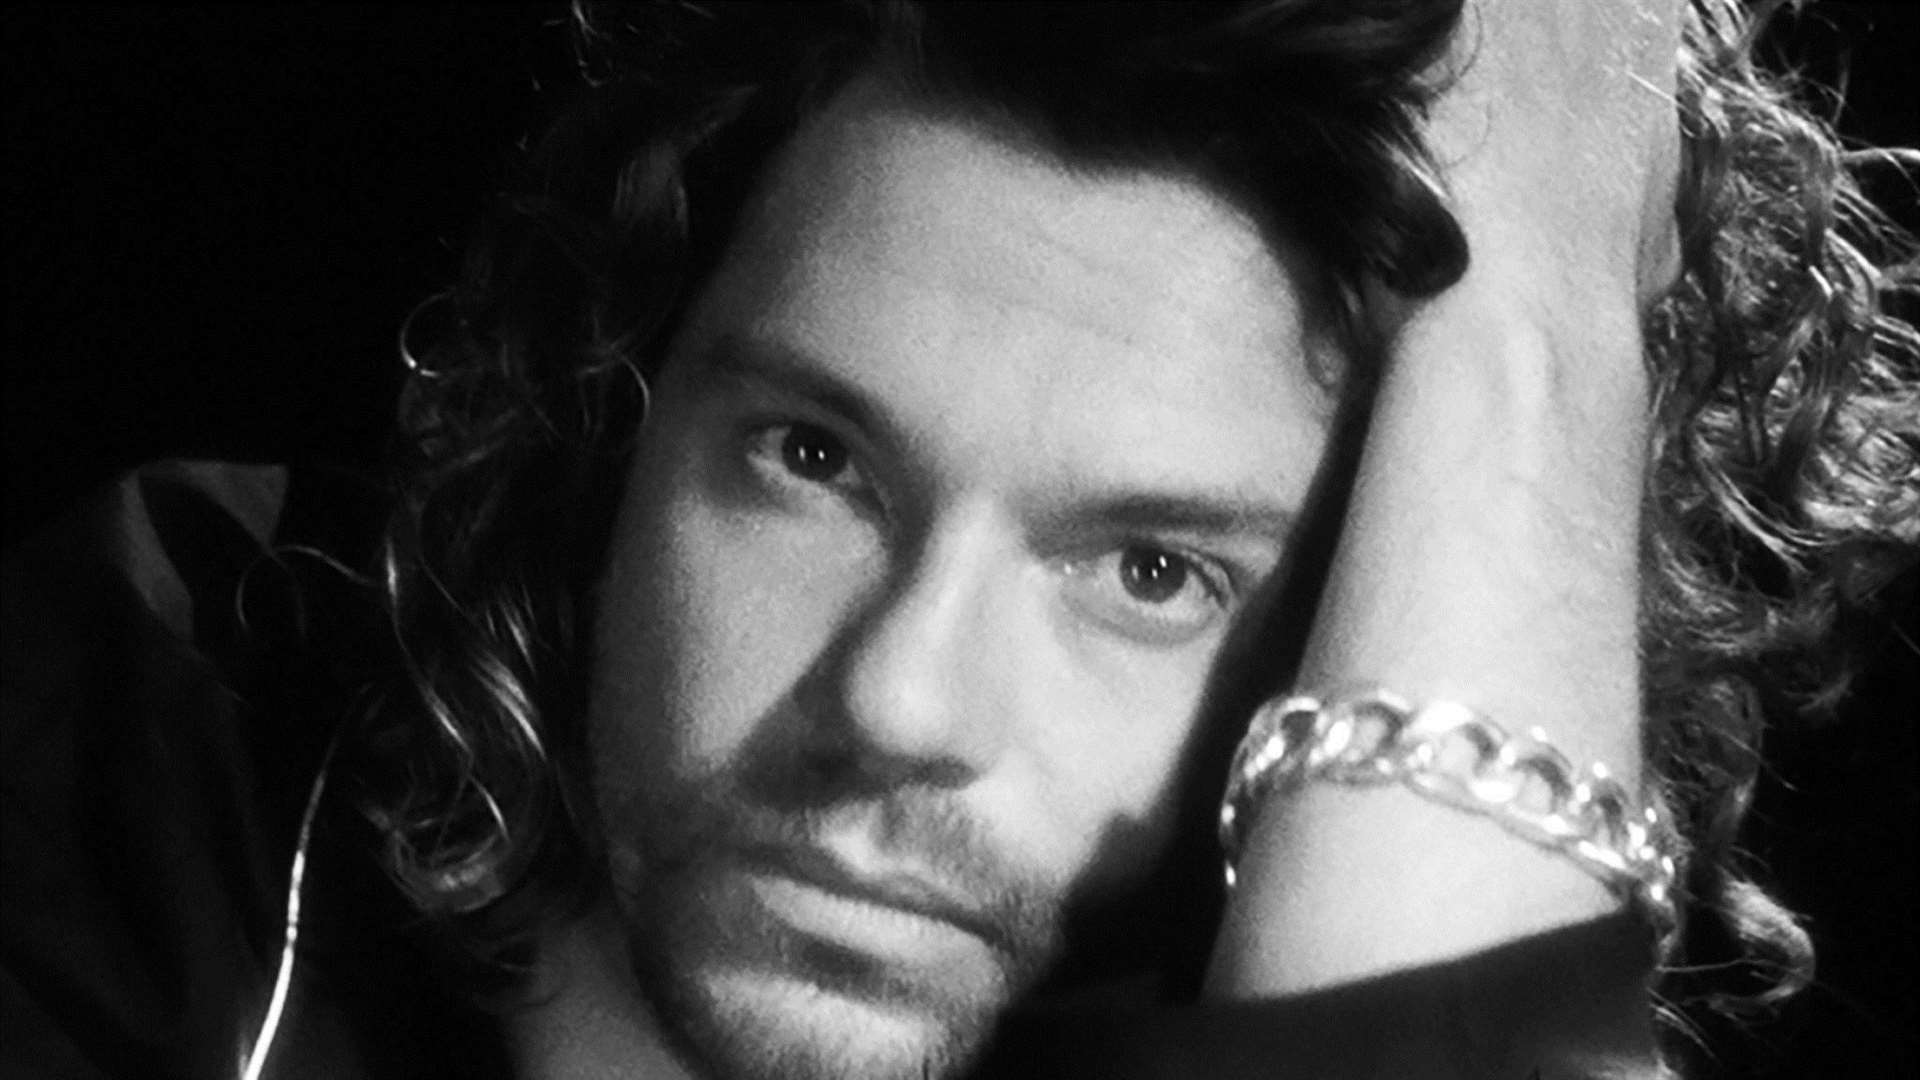 Michael Hutchence was the front man for rock sensation INXS